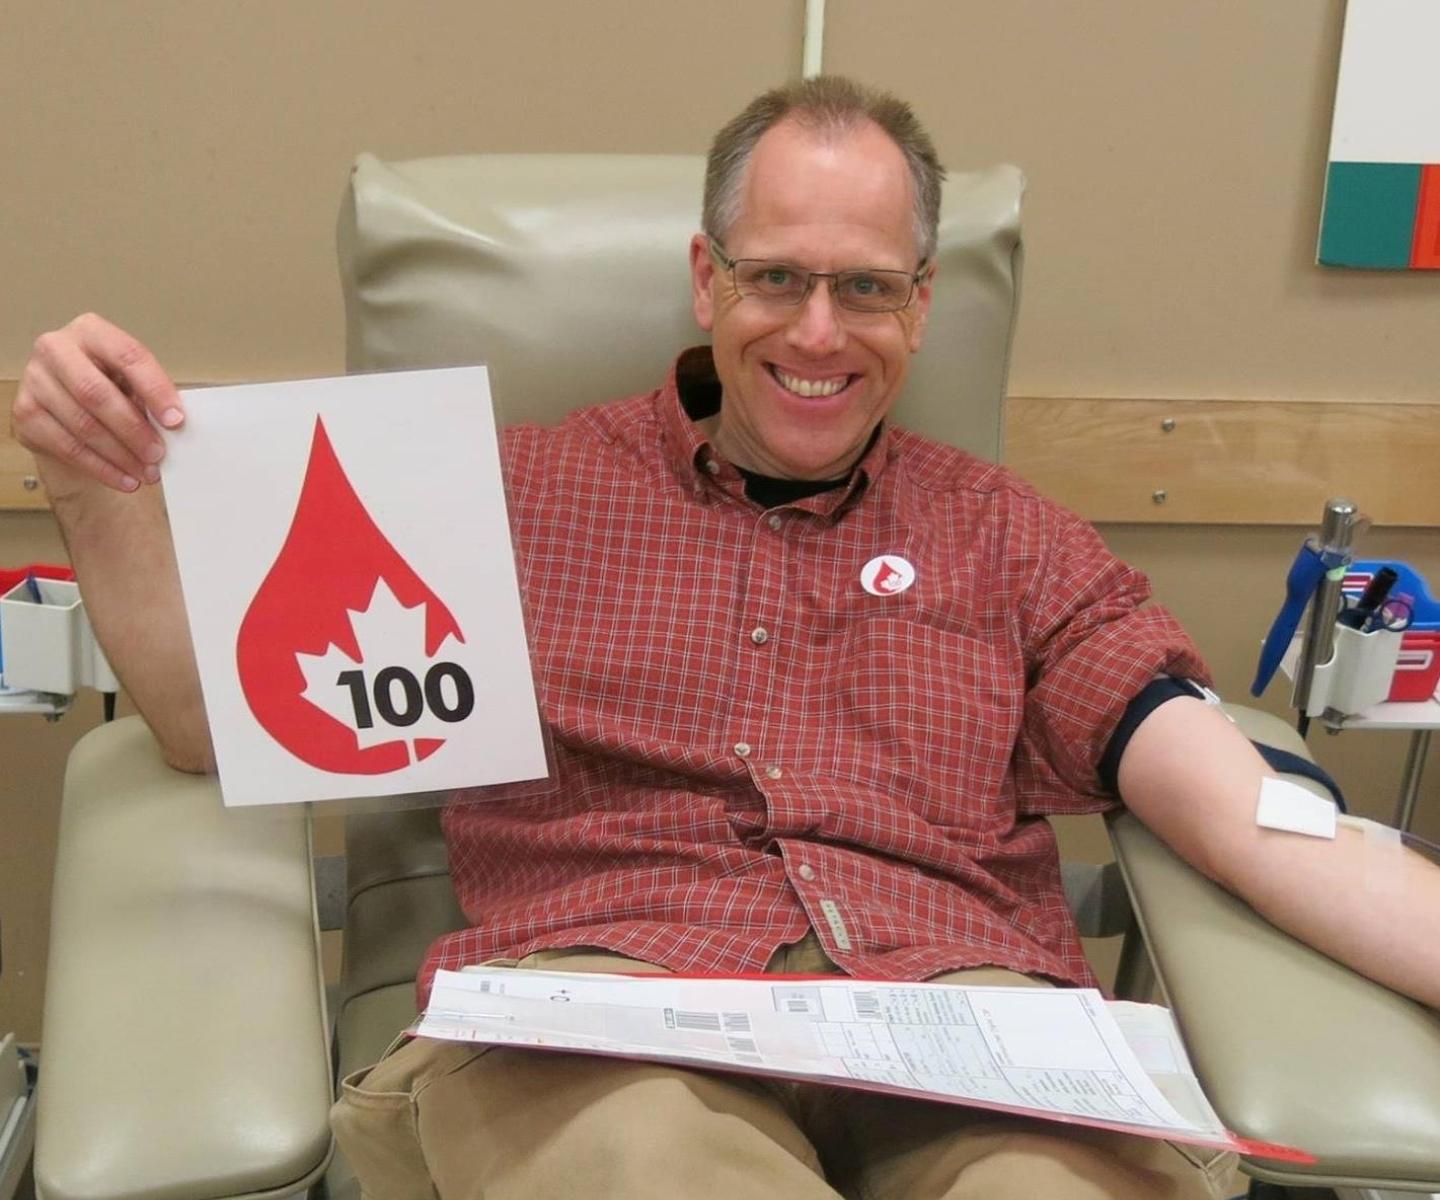 Blood donor holding sign featuring a blood drop and number 100